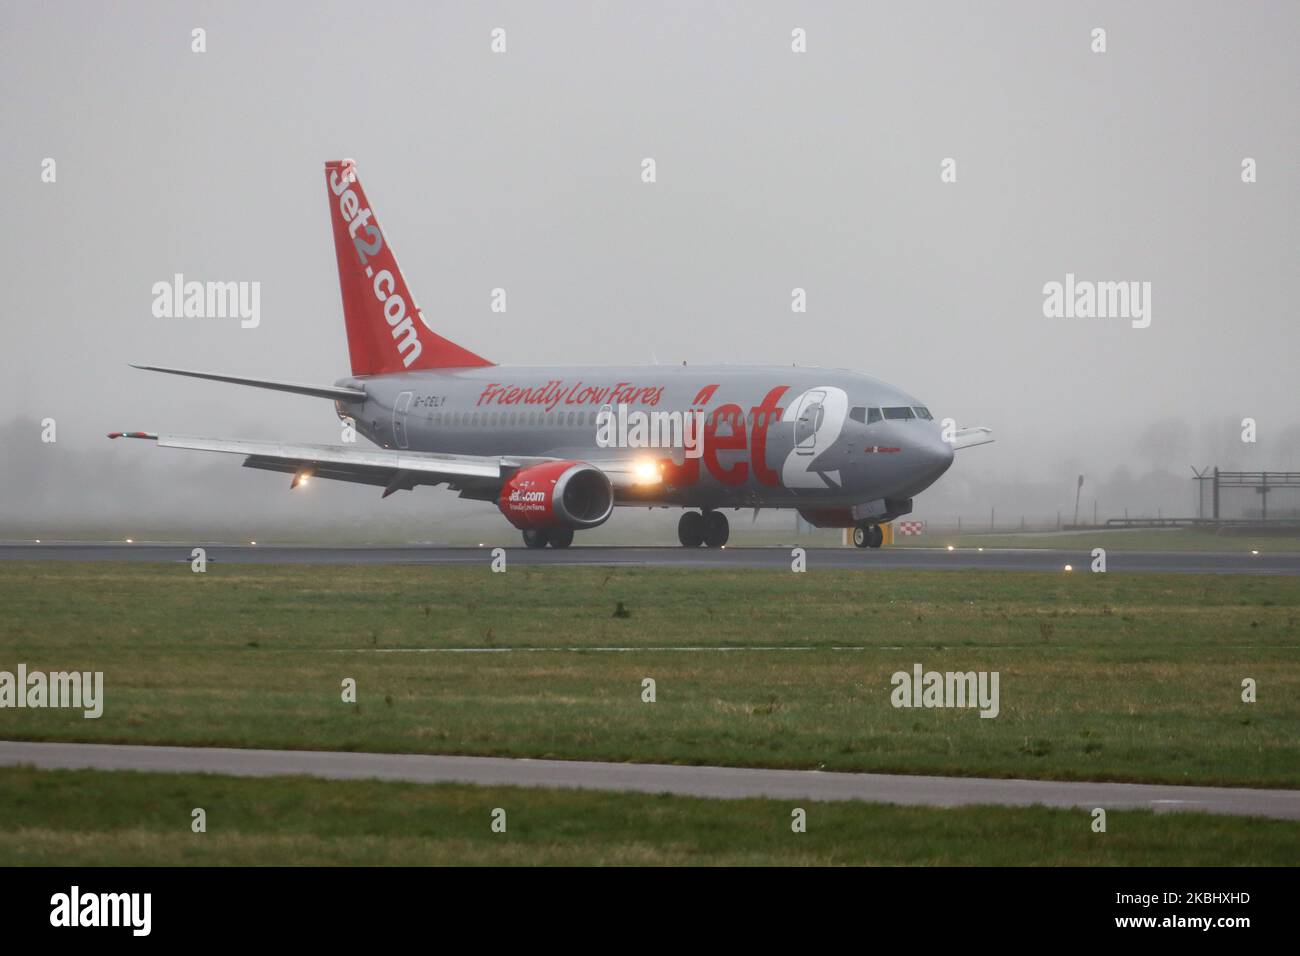 Jet2 Boeing 737-300 (QC) aircraft as seen landing during weather with fog, mist and a storm at Amsterdam Schiphol AMS EHAM International Airport on February 24, 2020. The airplane is a Classic Boeing 737-300 QC that means Quick Change from passenger to cargo / freight one. The airplane has 2x CFMI jet engines, registration G-CELY and is named Jet2 Glasgow. Jet2.com LS EXS CHANNEX is a British low-cost leisure airline carrier offering scheduled and charter flights, based with headquarters at Leeds Bradford airport. (Photo by Nicolas Economou/NurPhoto) Stock Photo